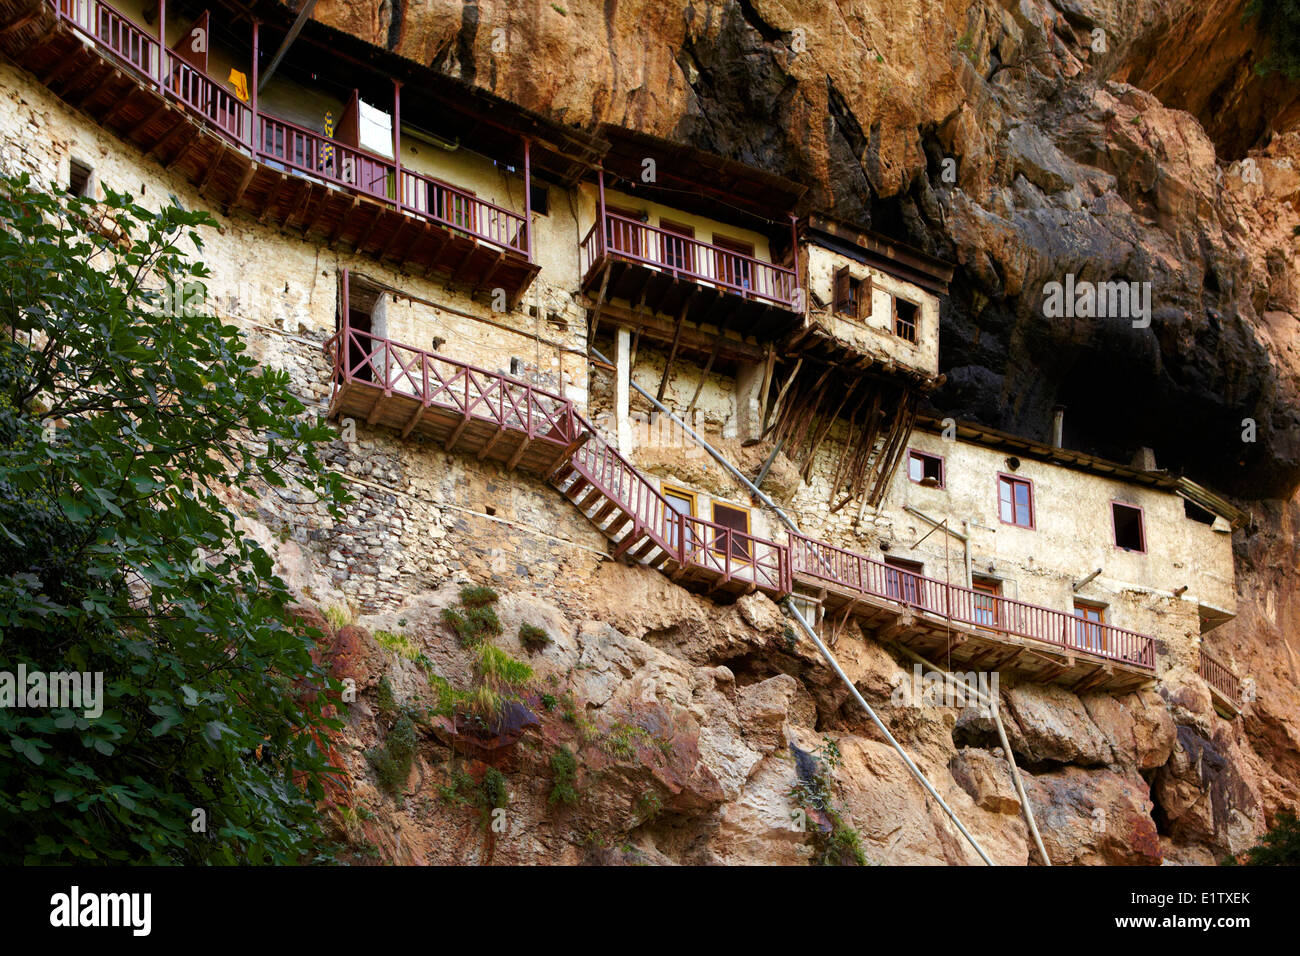 Prodromos Monastery High Resolution Stock Photography and Images - Alamy